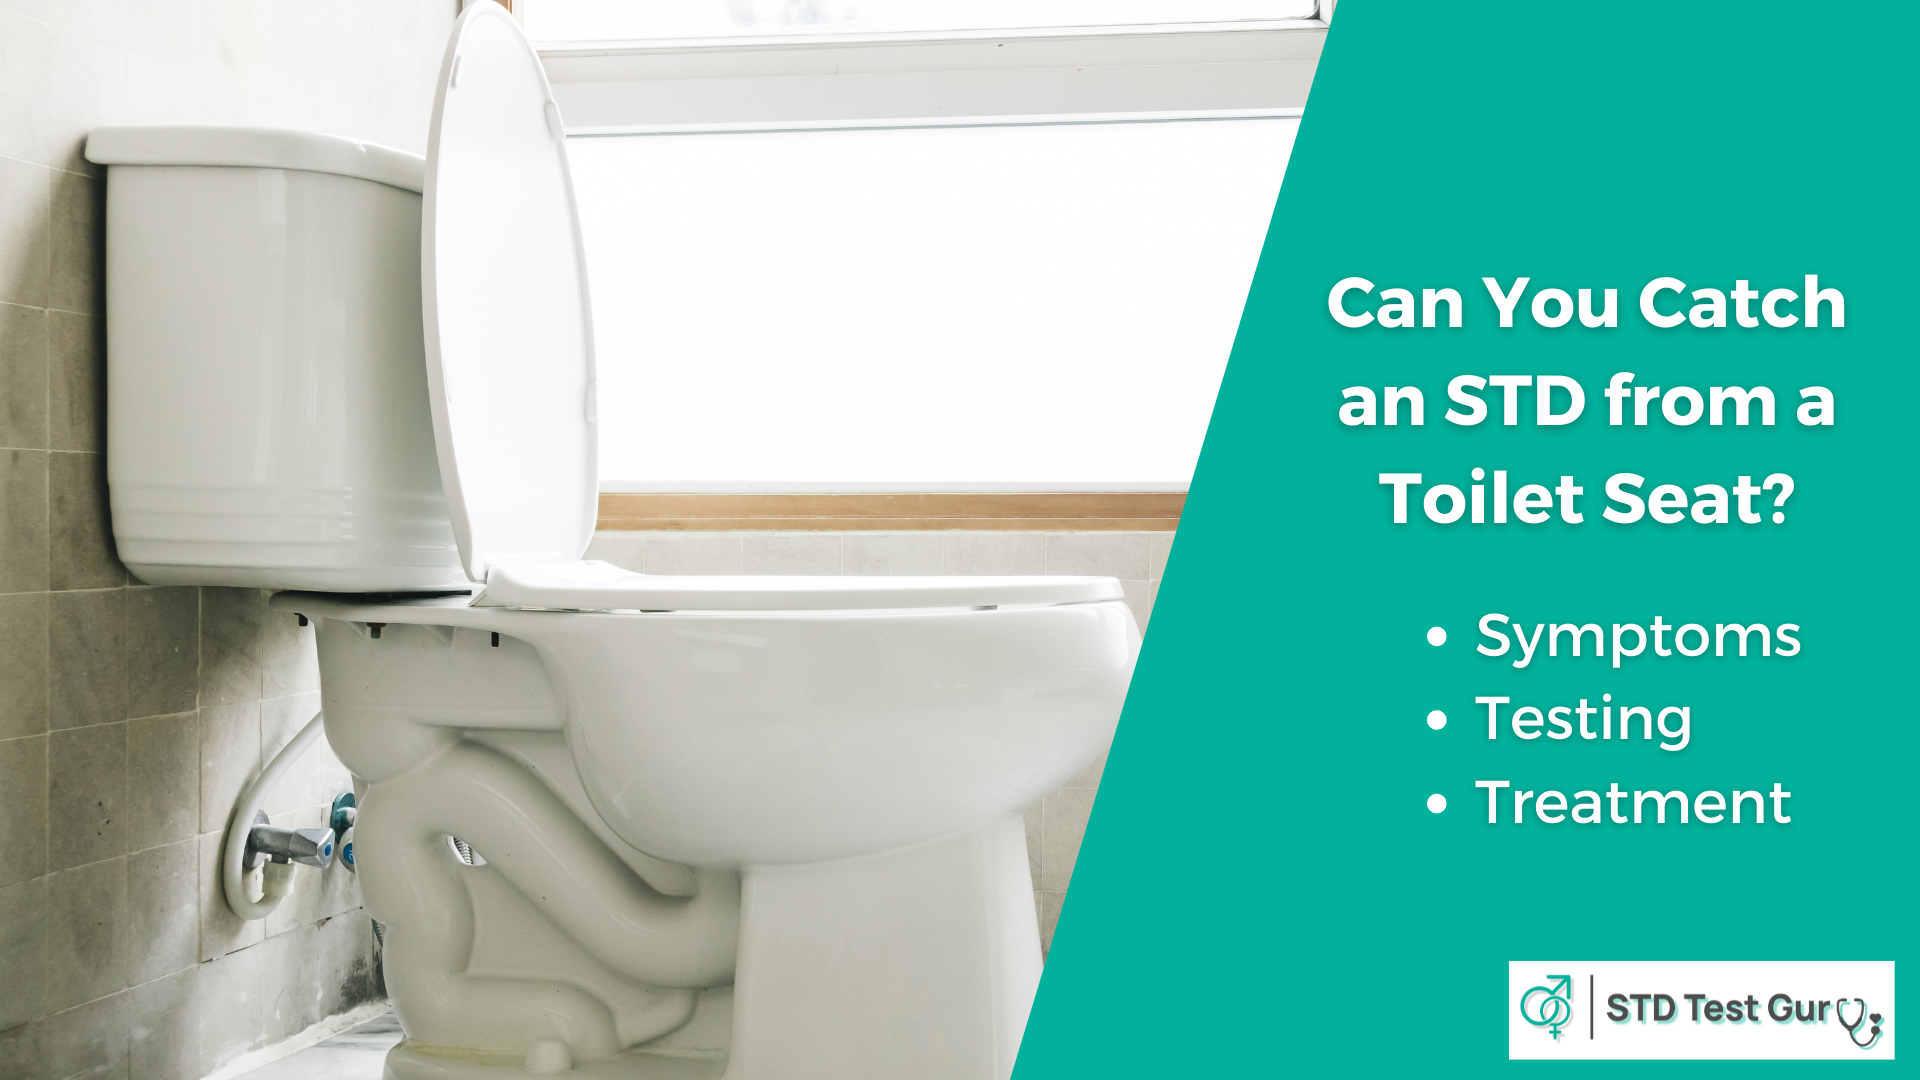 Can You Catch an STD from a Toilet Seat - STDTestGuru